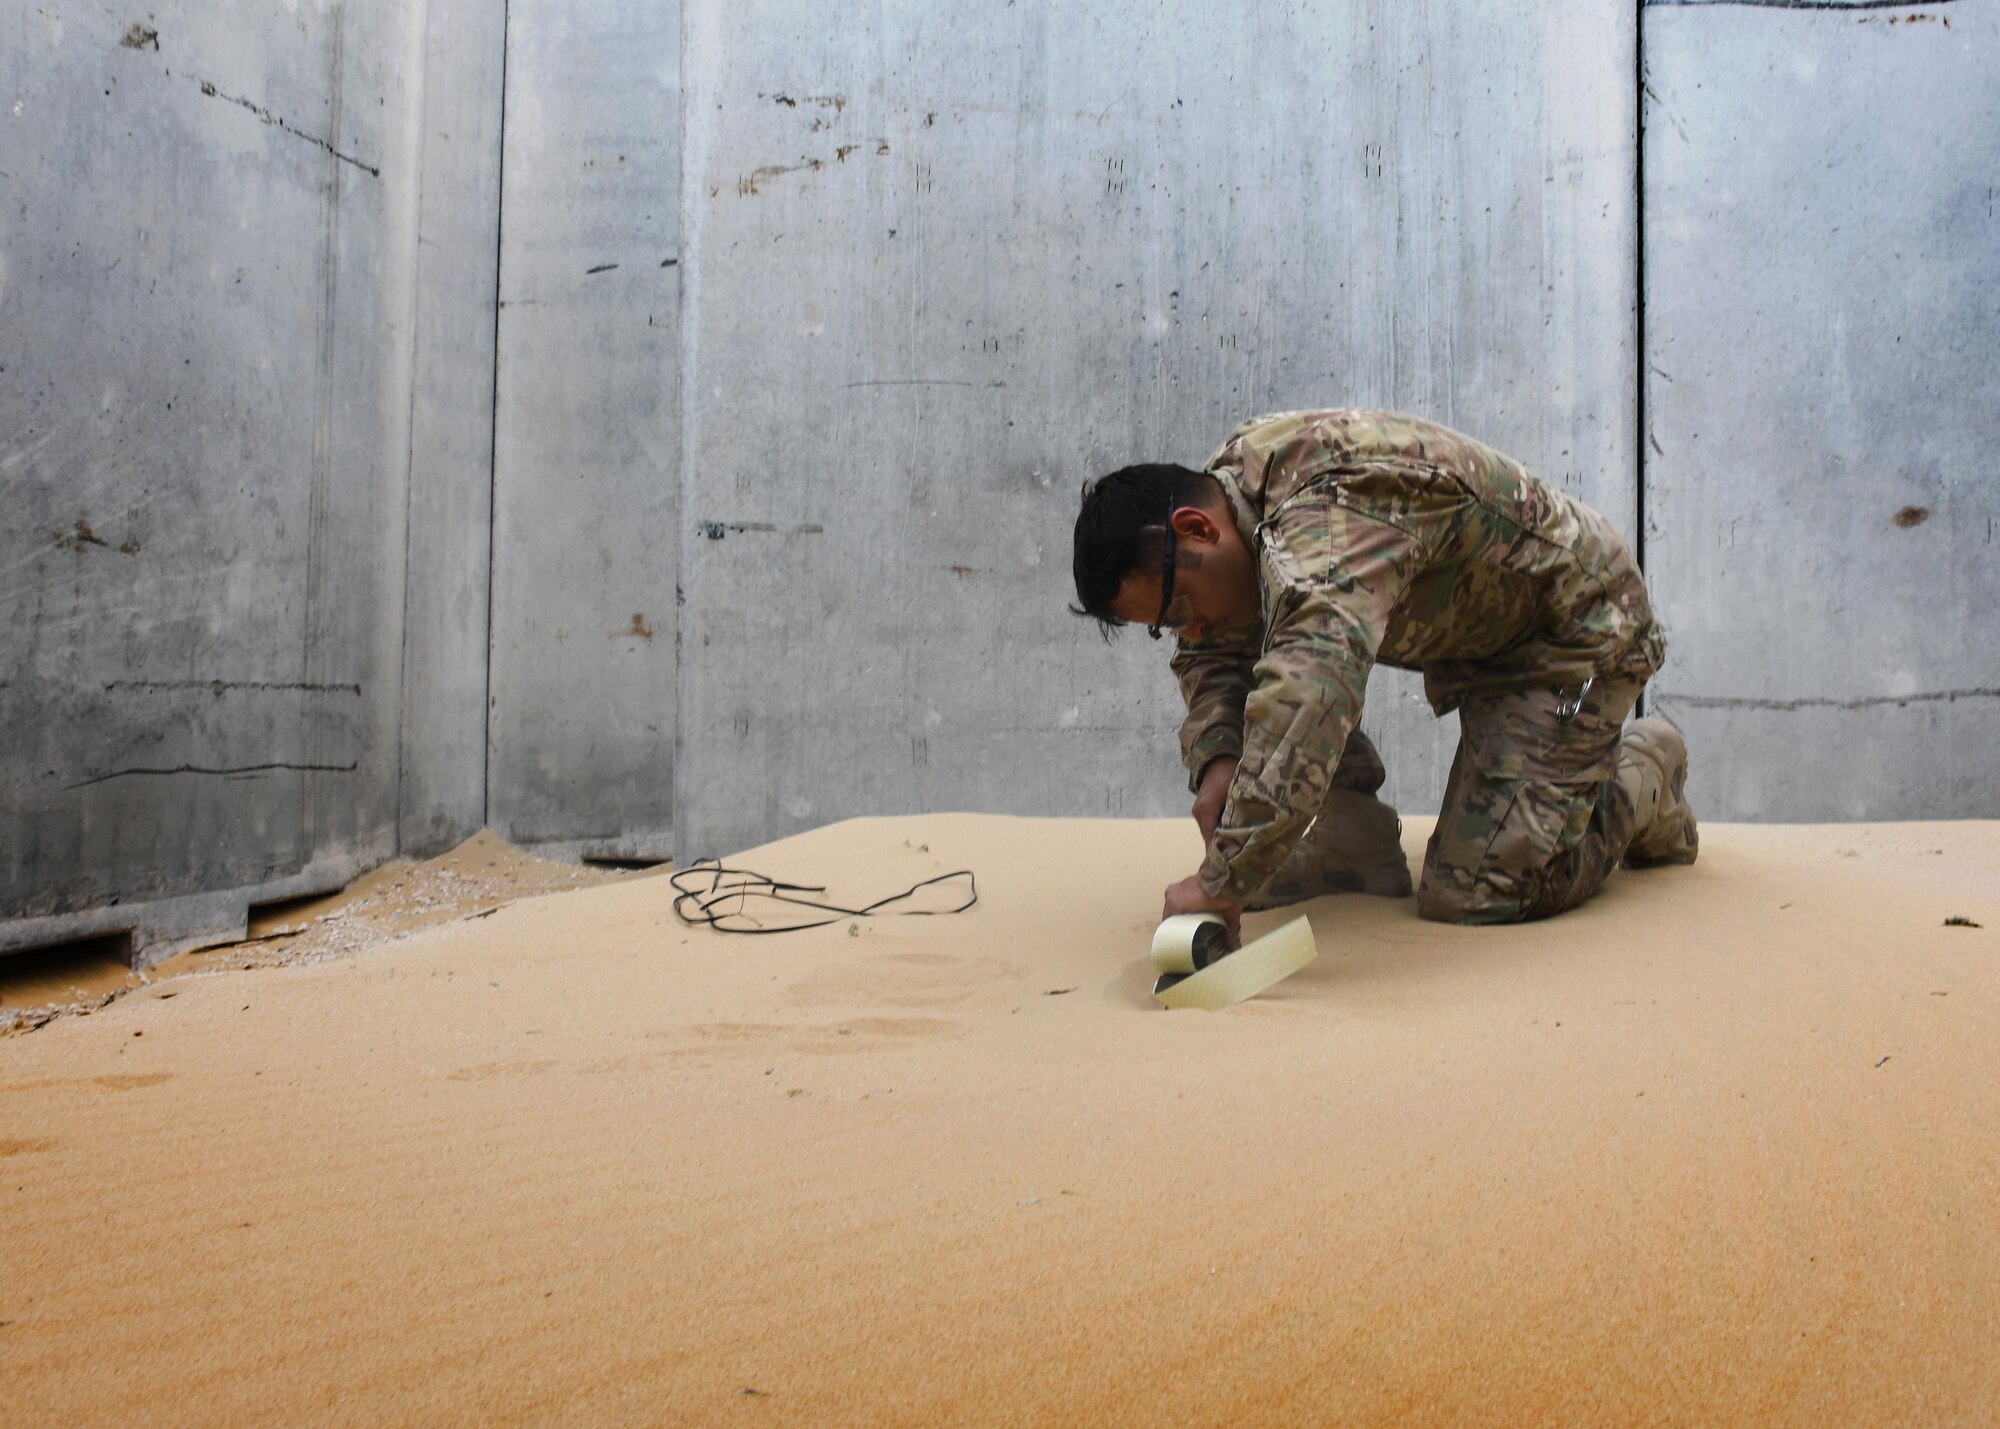 U.S. Air Force Staff Sgt. Juan Ortiz, an explosive ordnance disposal technician with the 379th Expeditionary Civil Engineer Squadron Explosive Ordnance Disposal Flight, places a C4 charge inside of the new EOD range at Al Udeid Air Base, Qatar, March 17, 2017. The new EOD range at Al Udeid allows for the EOD technicians to train with live explosives, as well as acts as an location for emergency detonations of munitions. (U.S. Air Force photo by Senior Airman Miles Wilson)